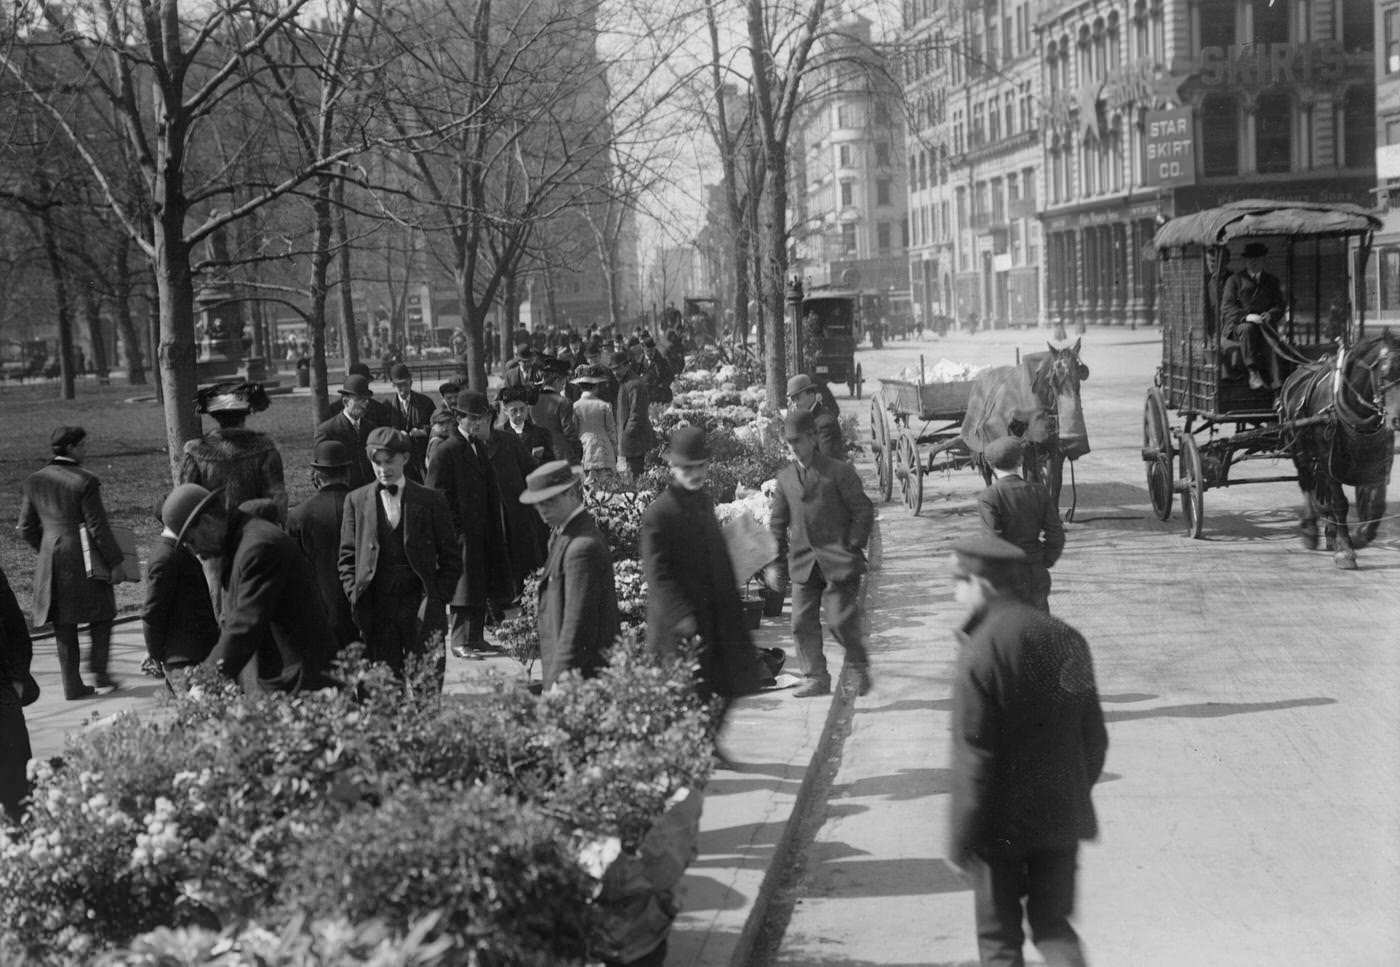 Buying Easter Flowers In Union Square, New York City, Circa 1900